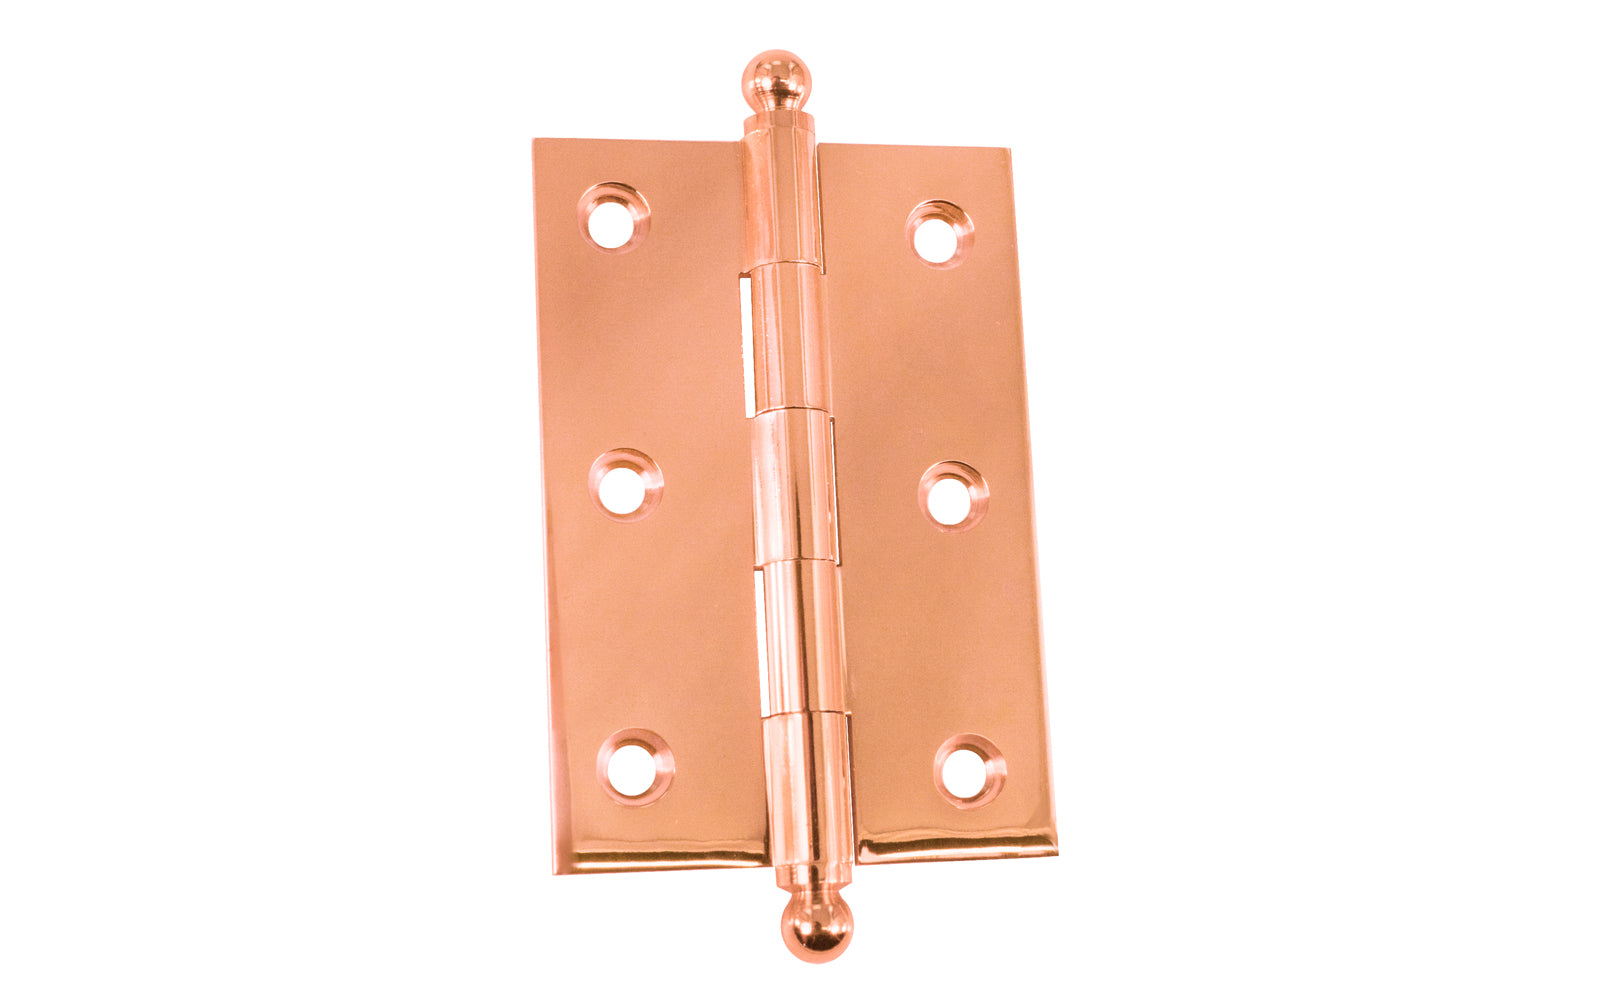 Classic Solid Brass Ball-Tip Cabinet Hinge ~ 2-1/2" x 1-3/4". Full mortise extruded hinges. 3/32" heavy duty leaf thickness gauge. Non-removable fixed hinge pin with ball tips. High quality thick cabinet hinge with ball tips. Polished Copper Finish.